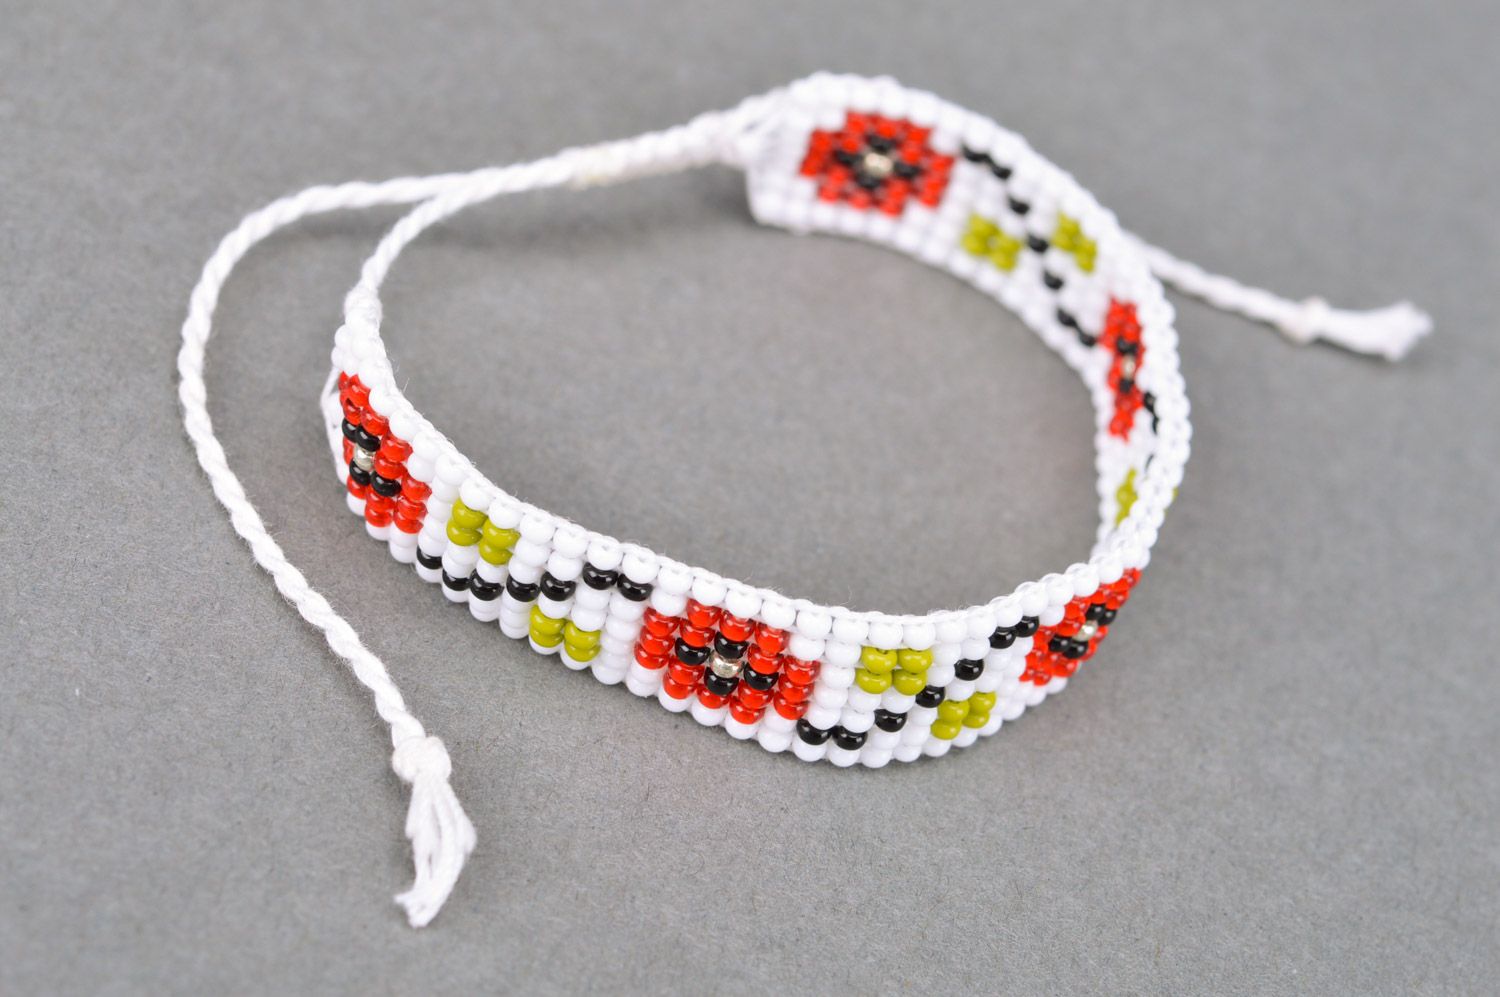 Handmade ethnic wrist bracelet woven of beads in white and red colors for women photo 2